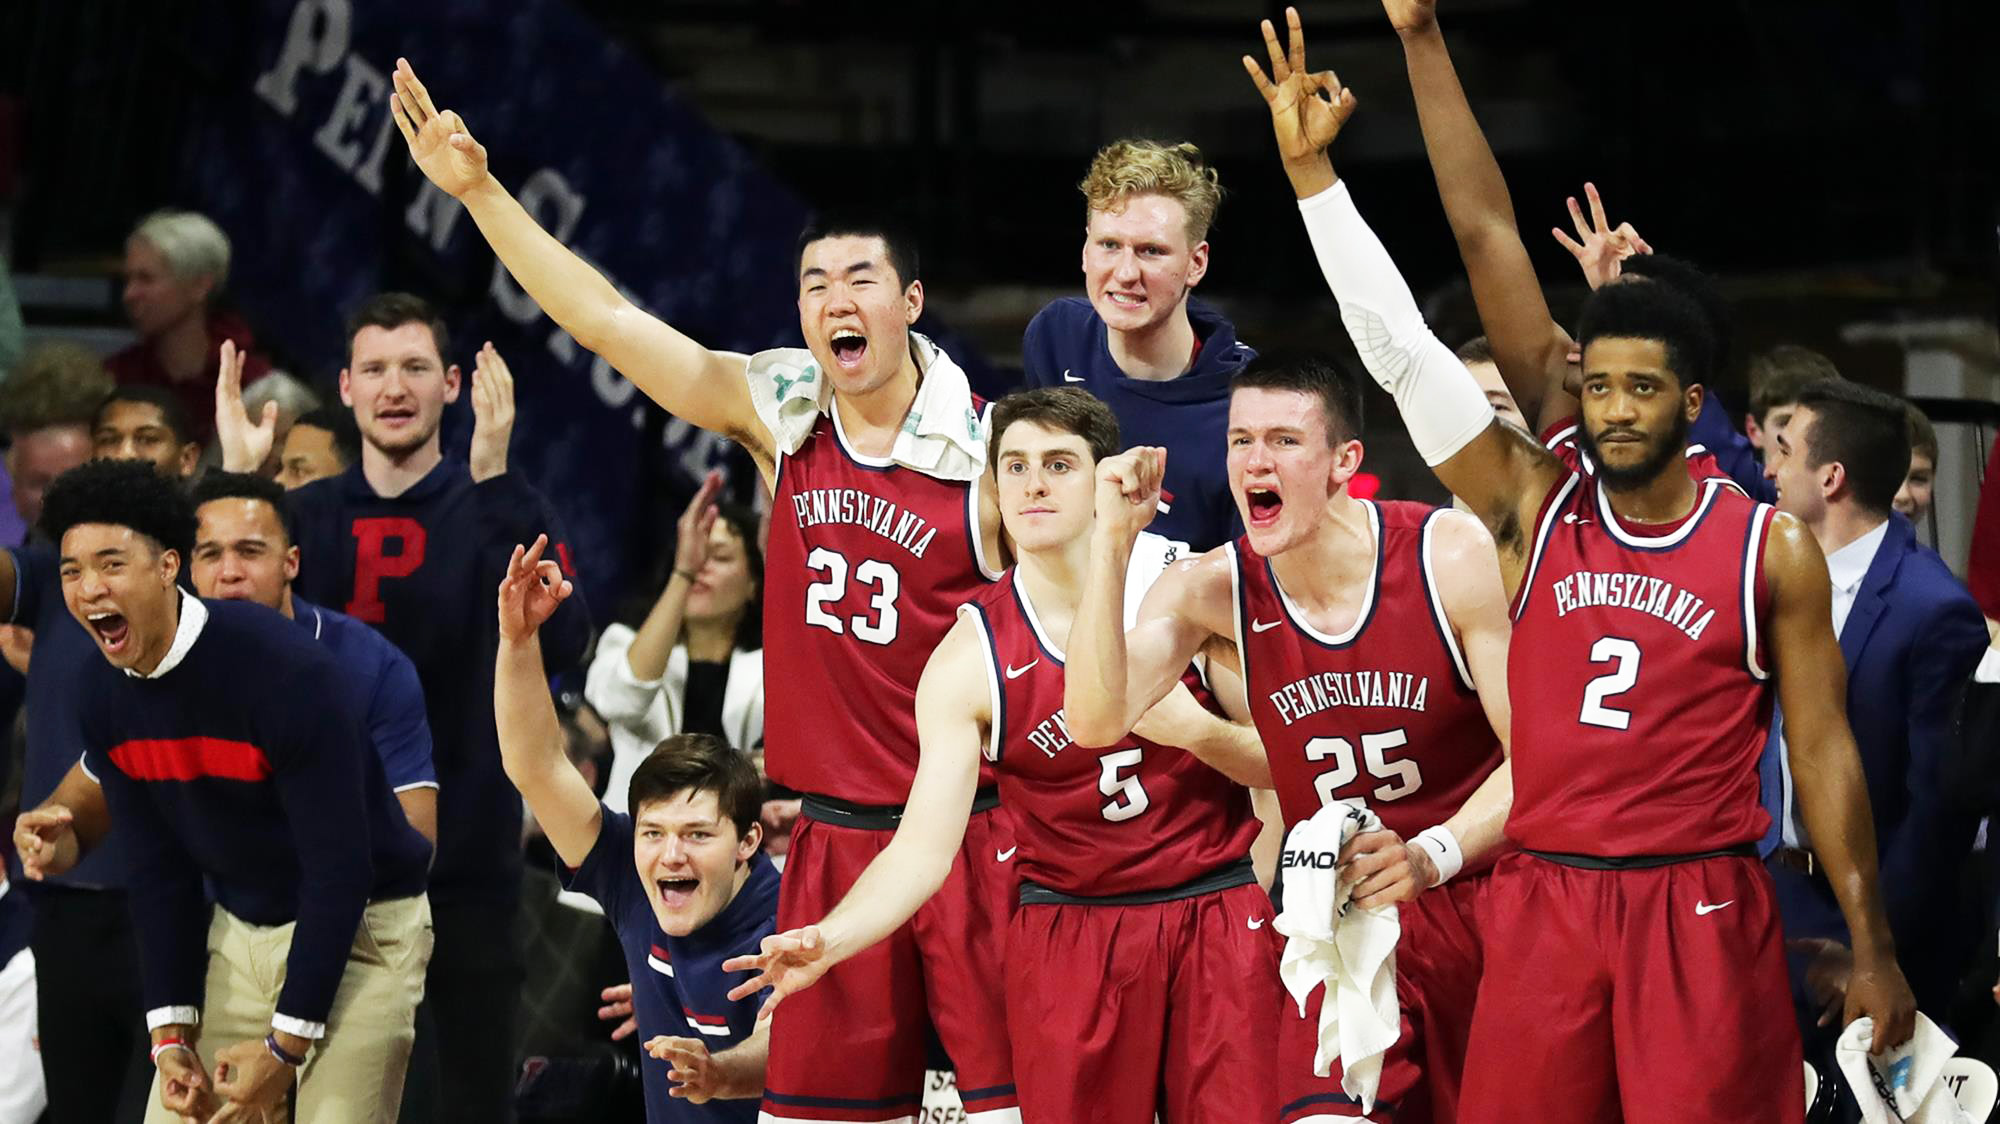 Men's basketball players celebrate on the bench holding up three fingers.